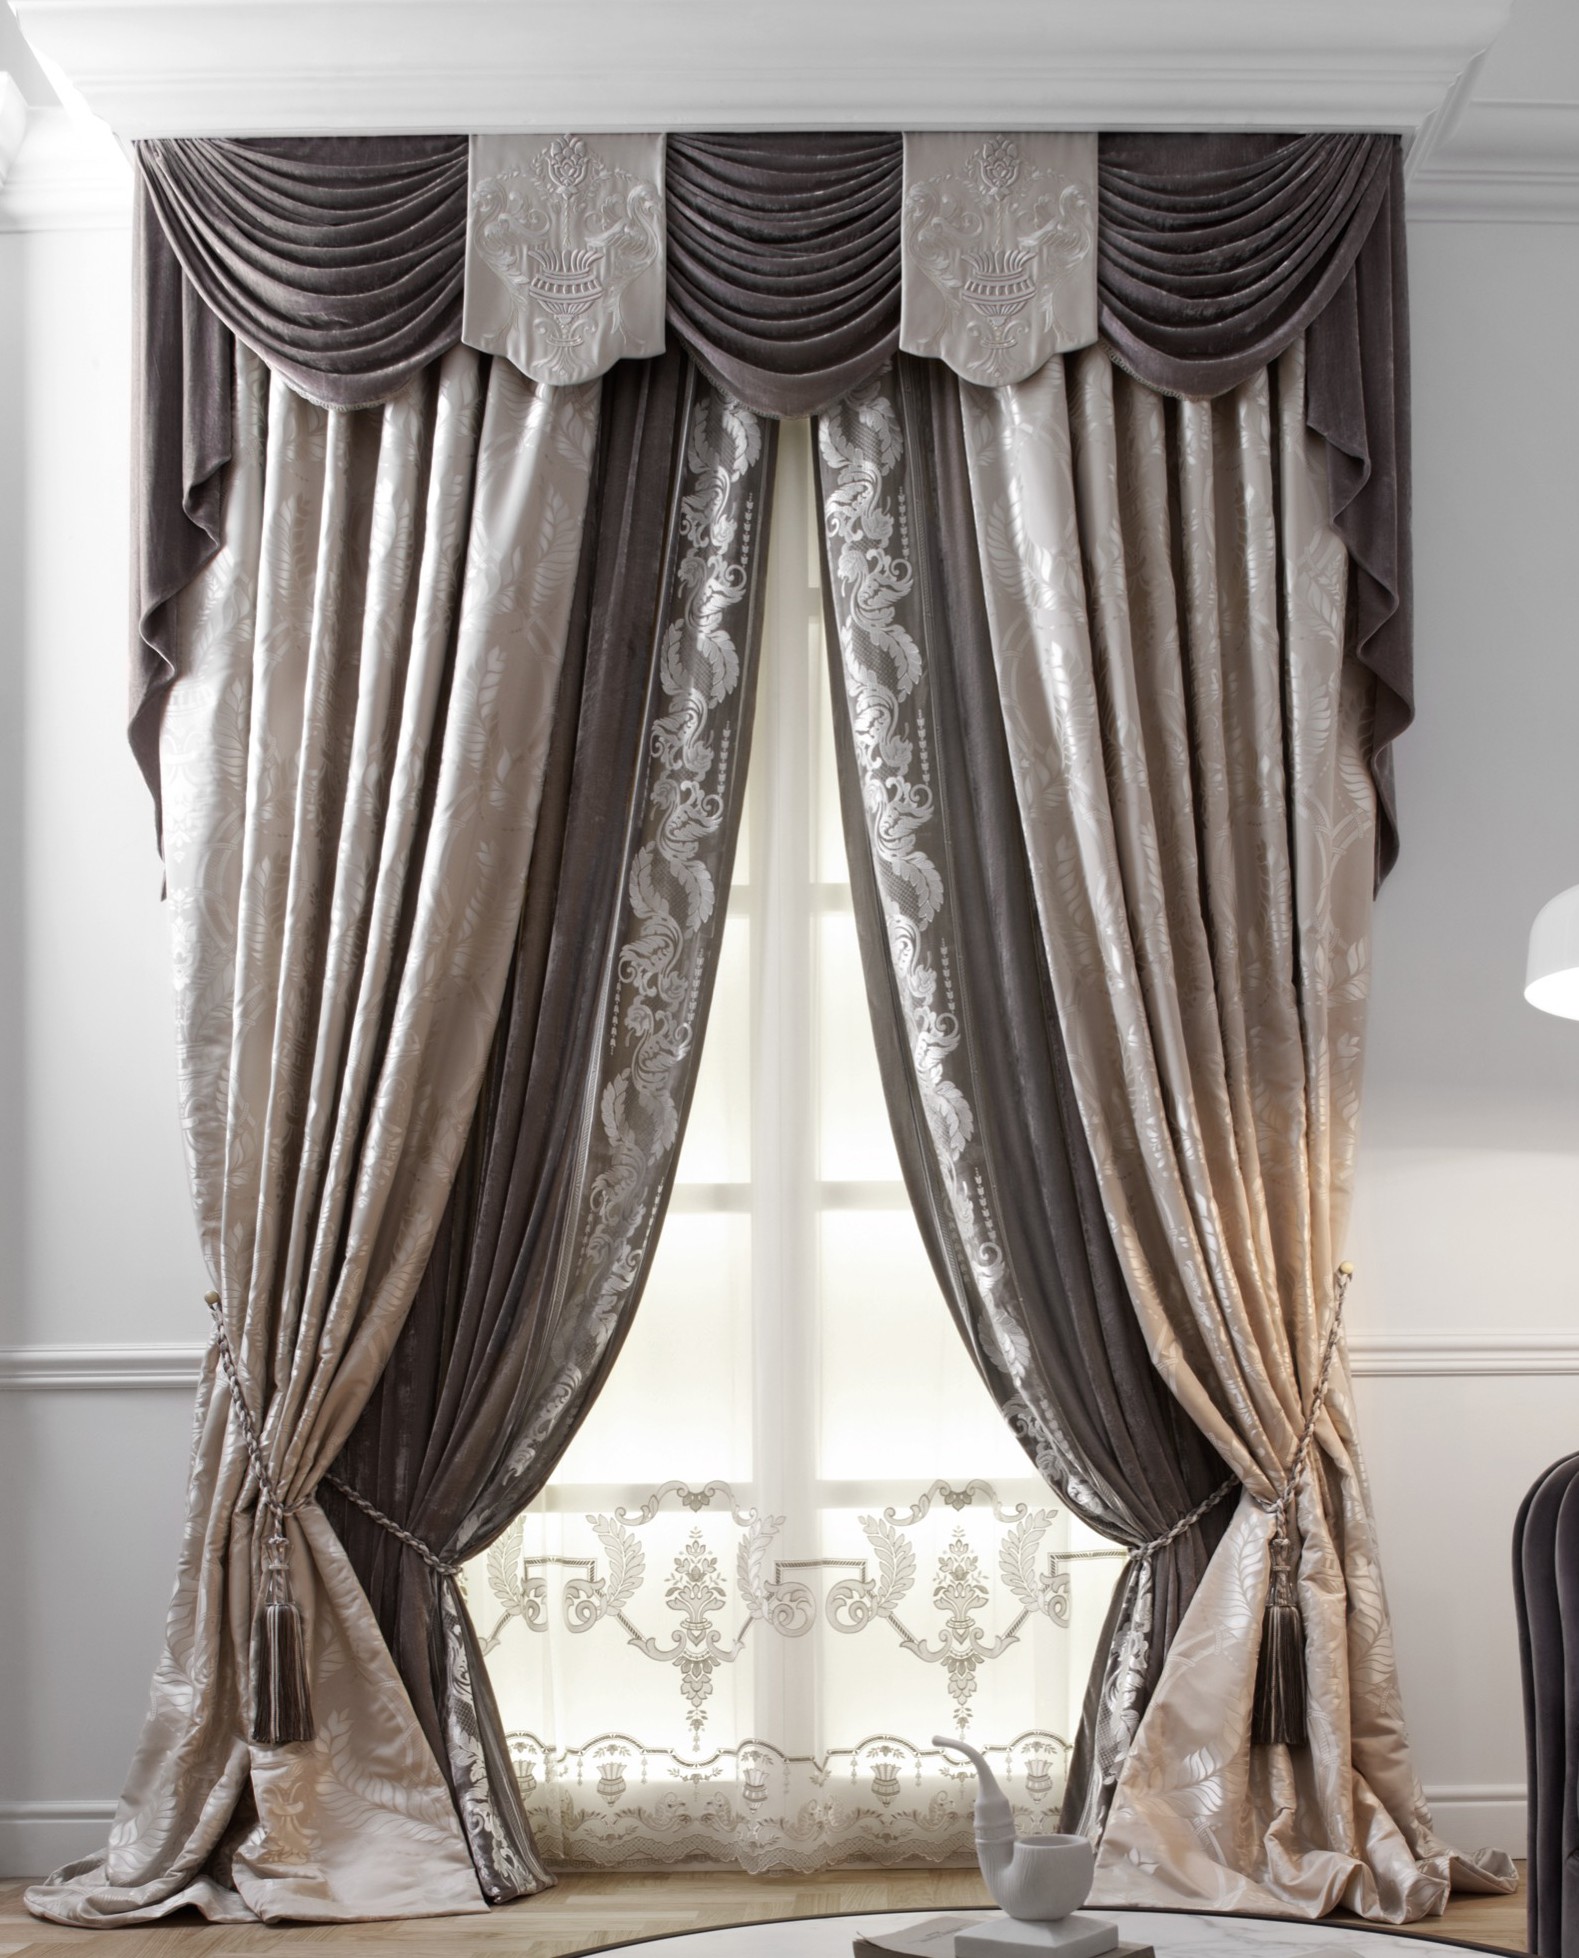 Custom Window Treatments Hand made draperies from our Masterpiece Collection. 55